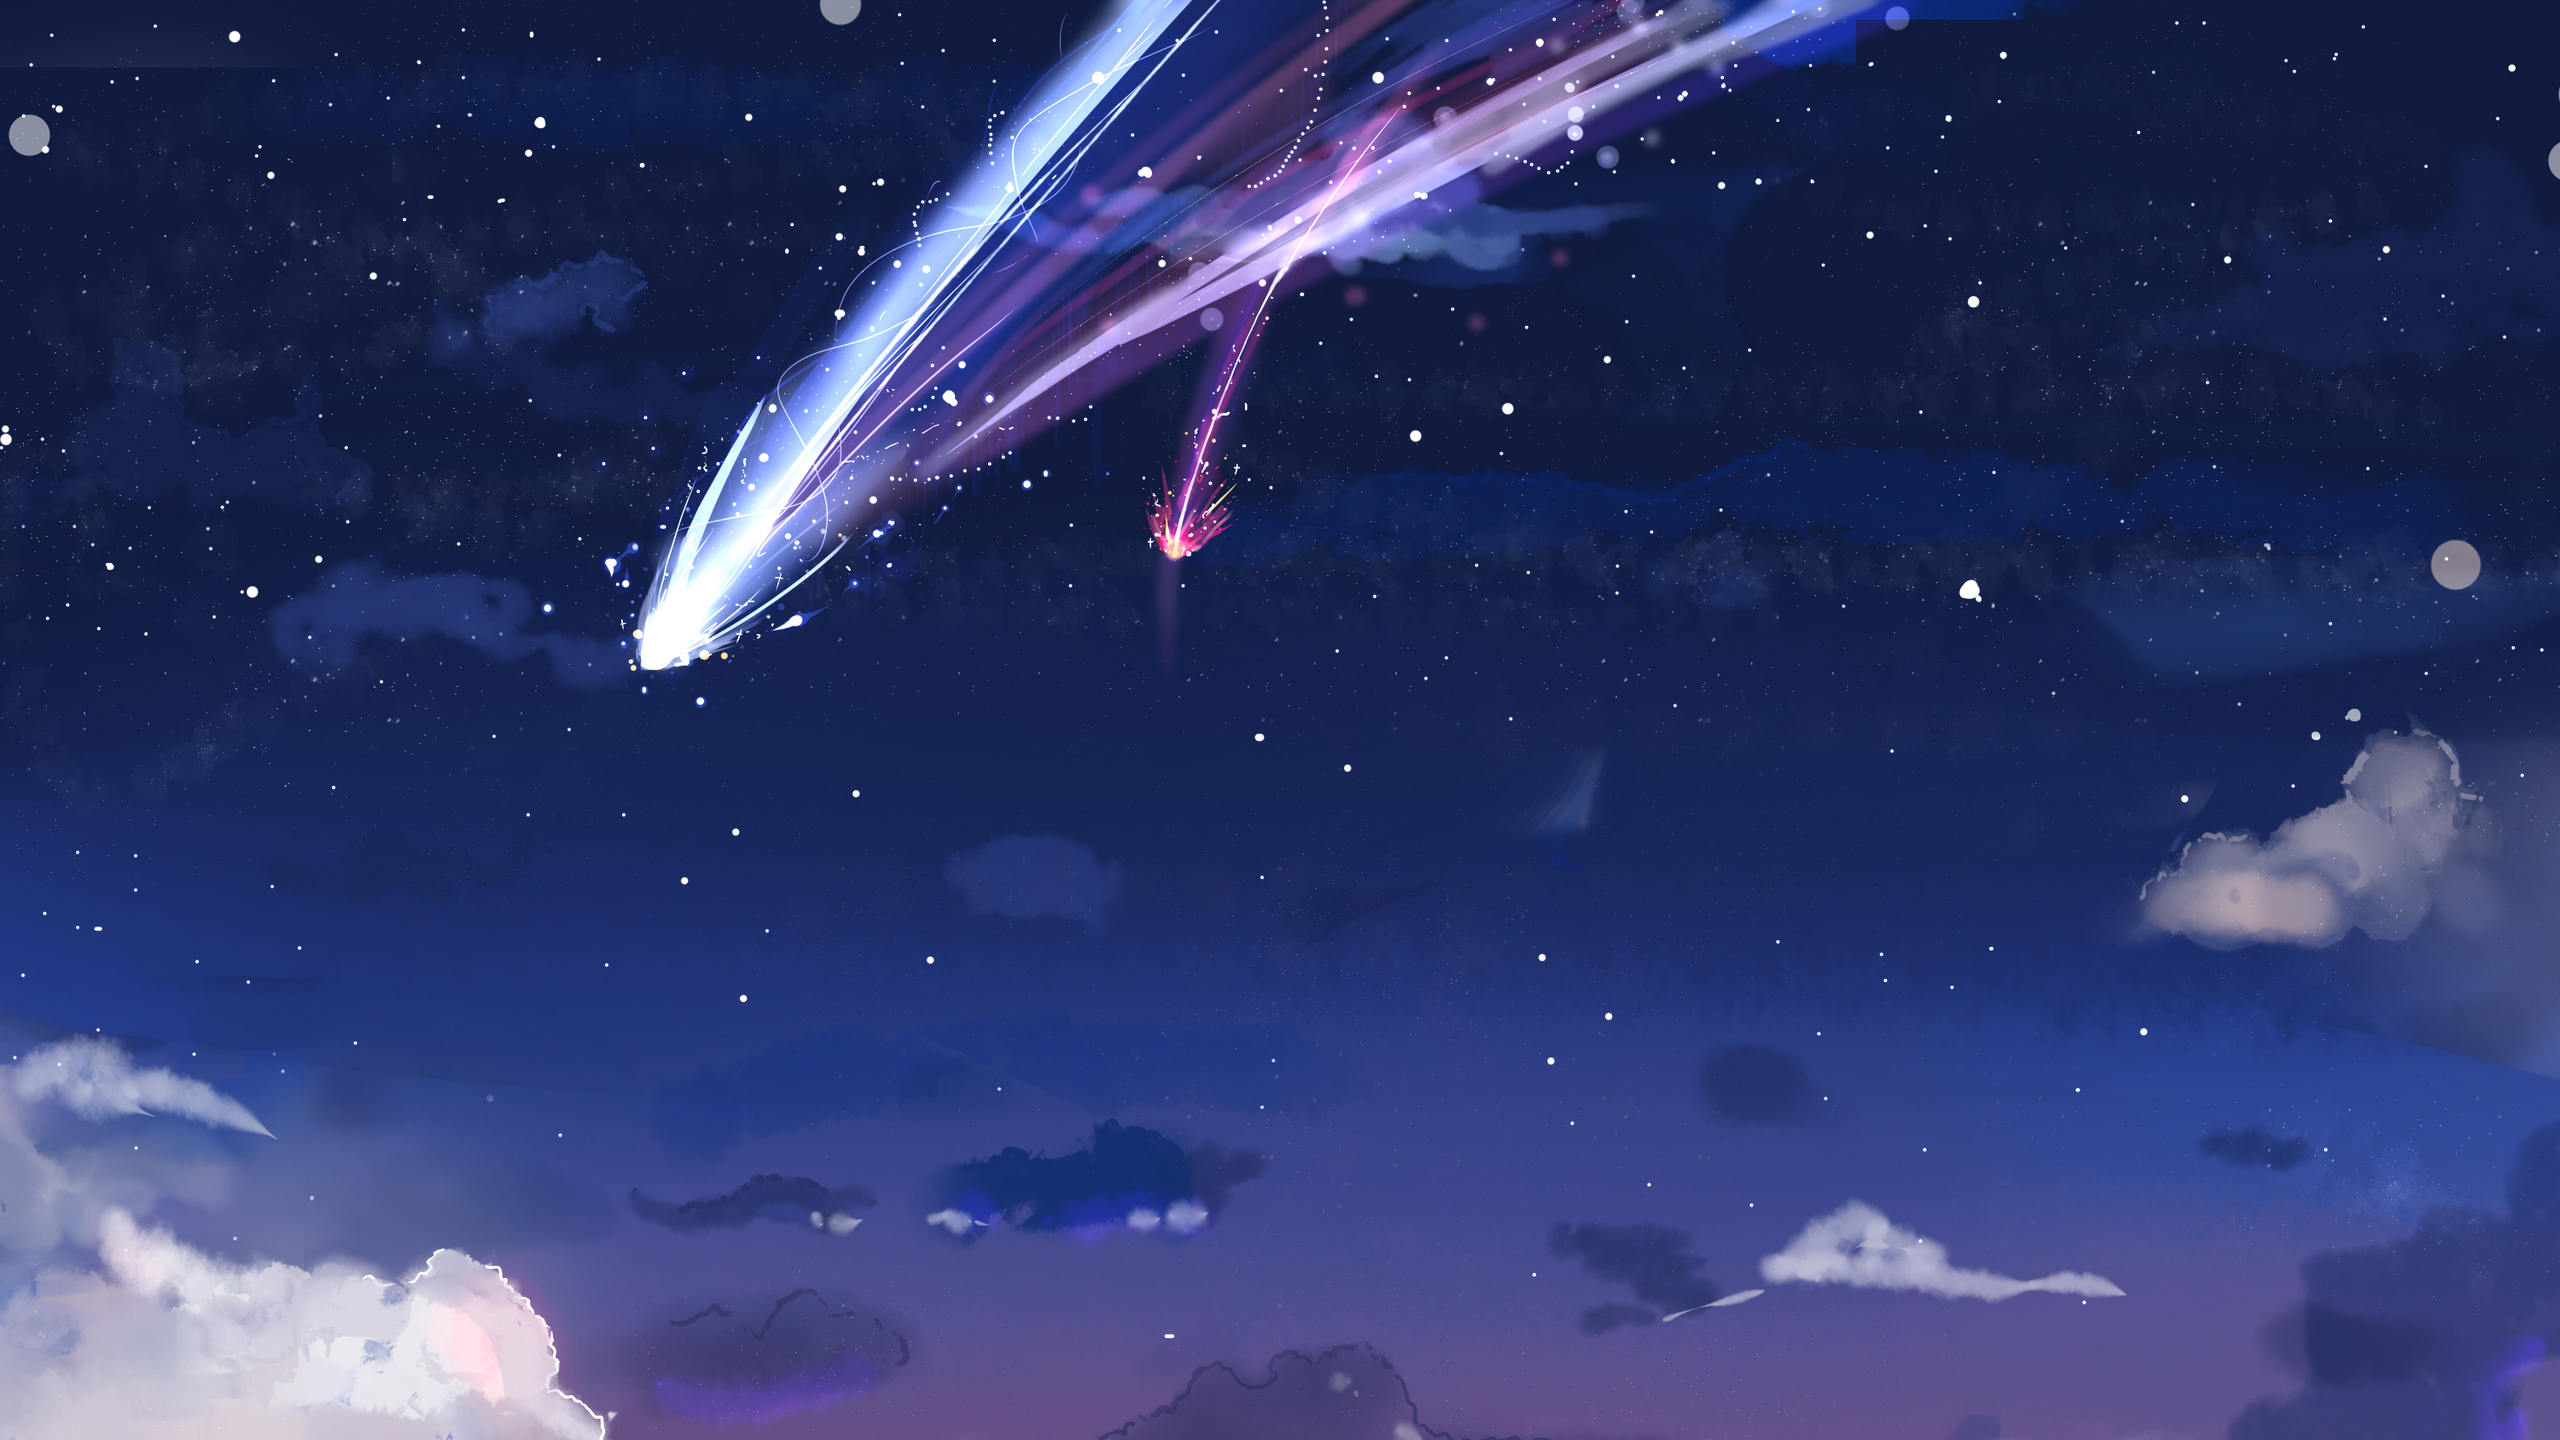 Your Name Wallpaper 1920X1080 4K